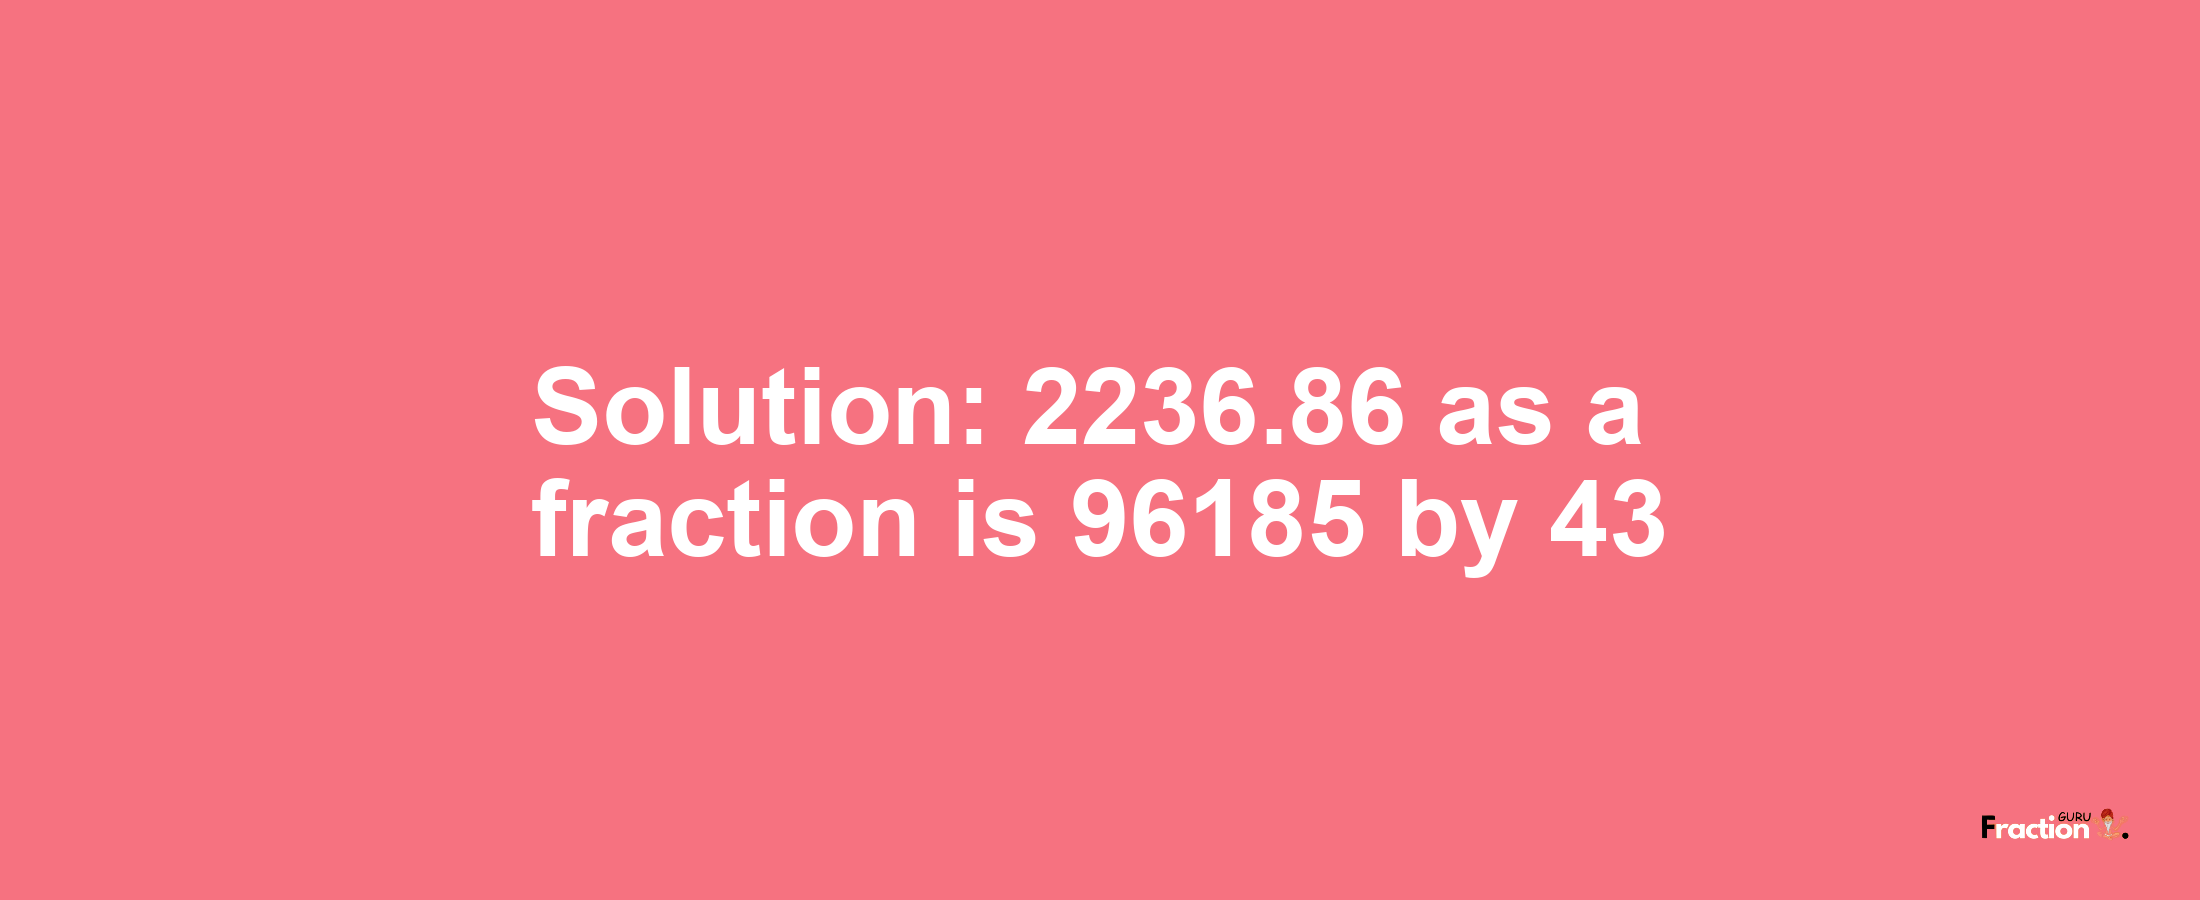 Solution:2236.86 as a fraction is 96185/43